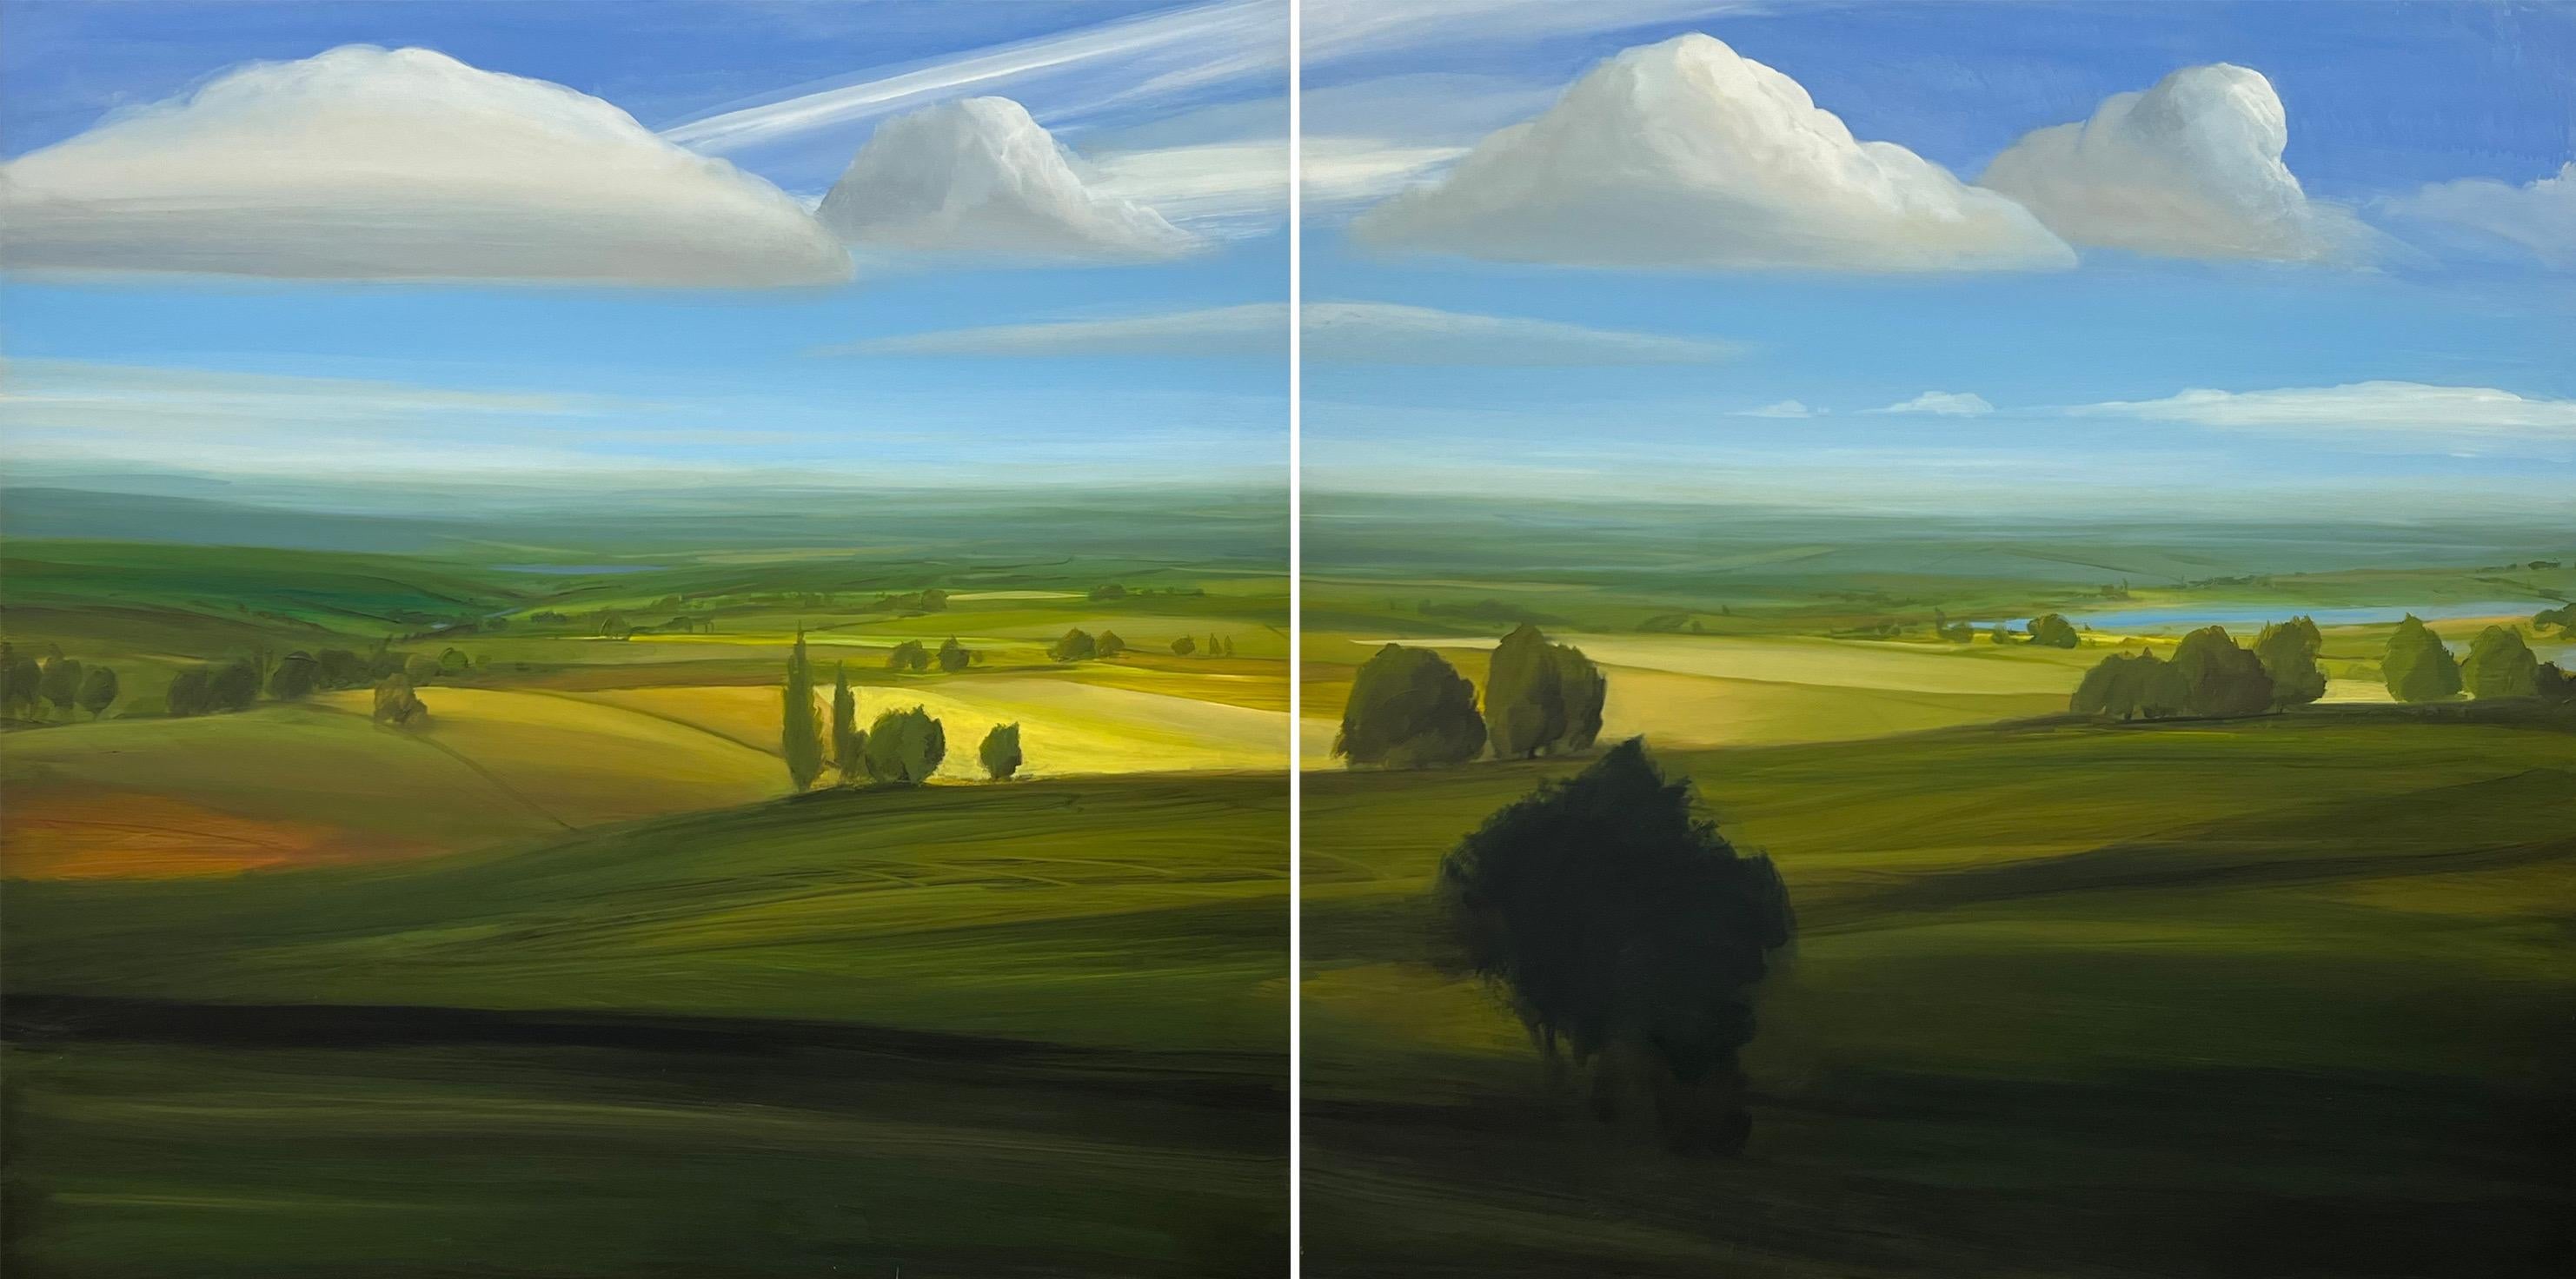 James Naughton Landscape Painting - Large Landscape Diptych Oil Painting of Lush Green Pastoral English Countryside